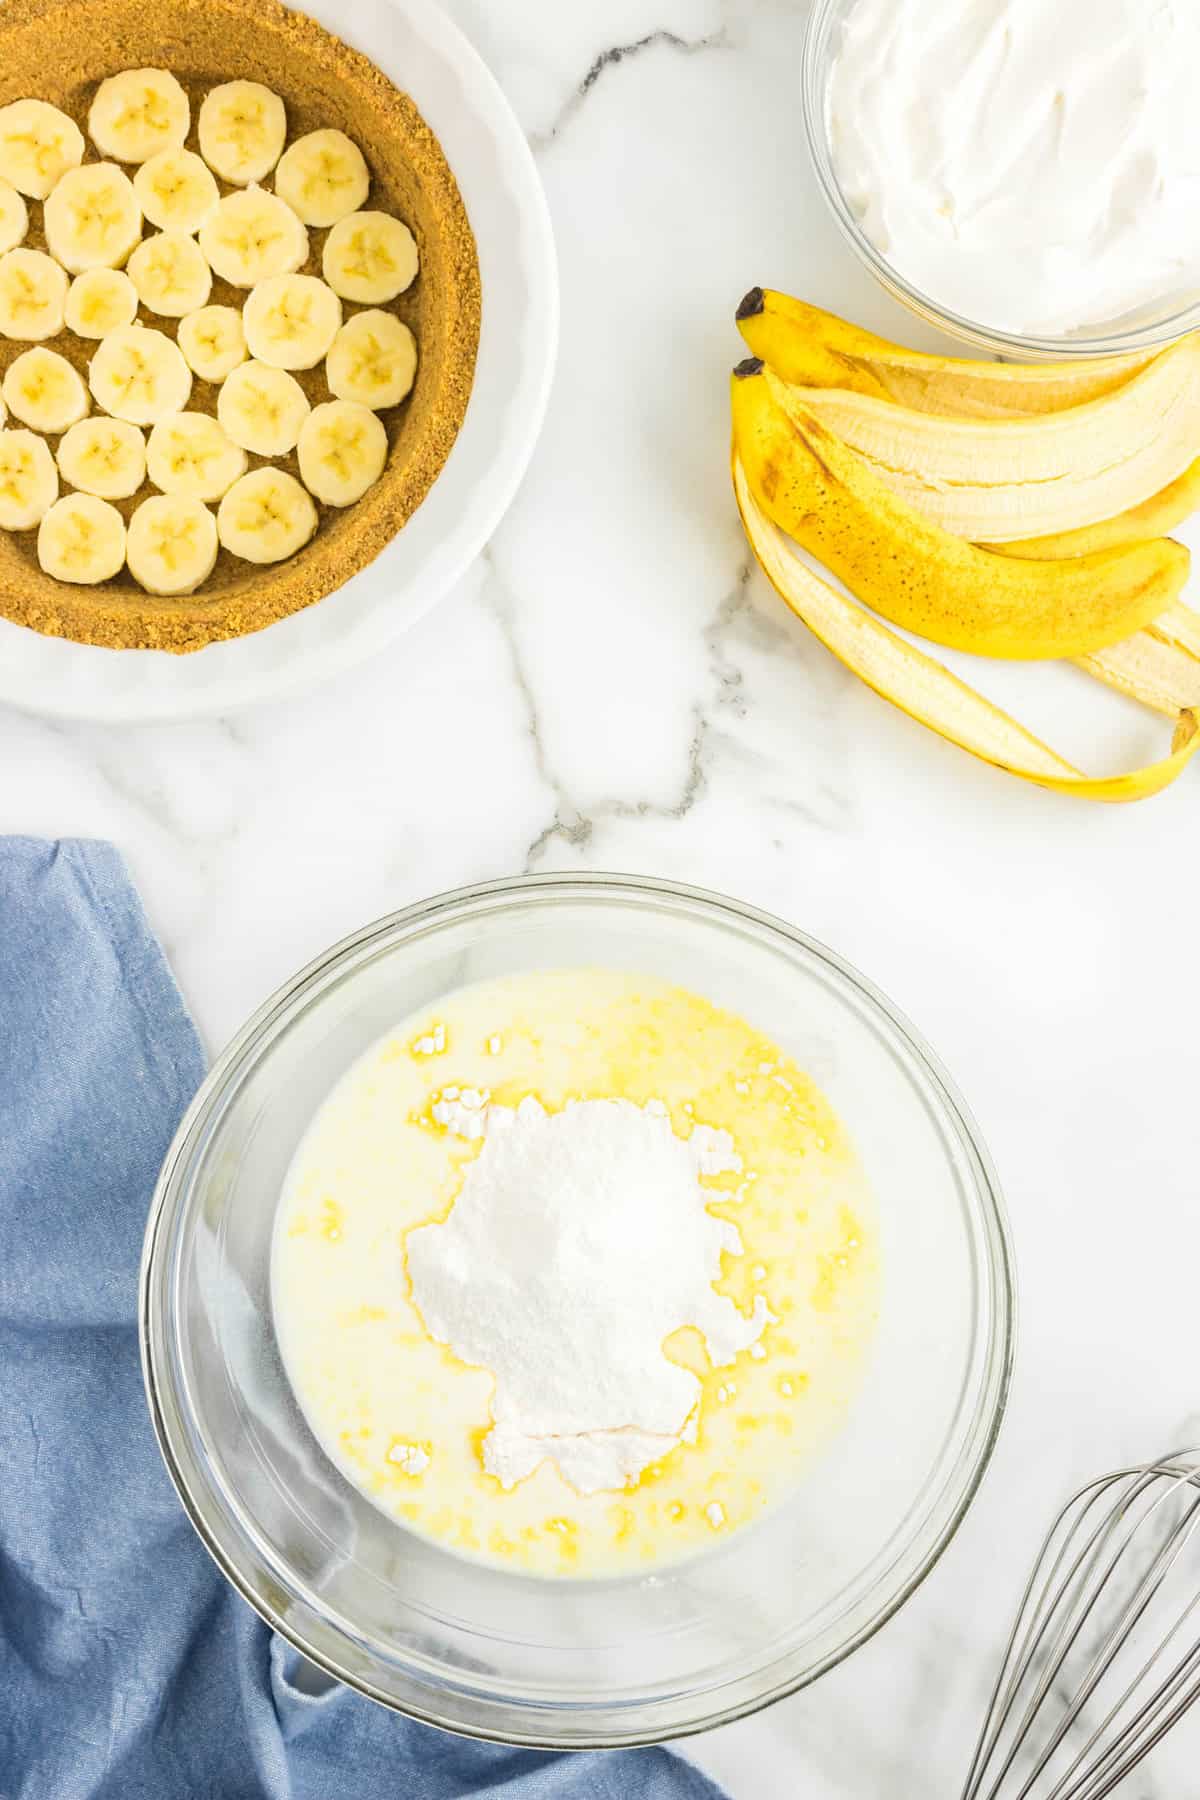 Combining Pie Filling in Mixing Bowl for No Bake Banana Cream Pie